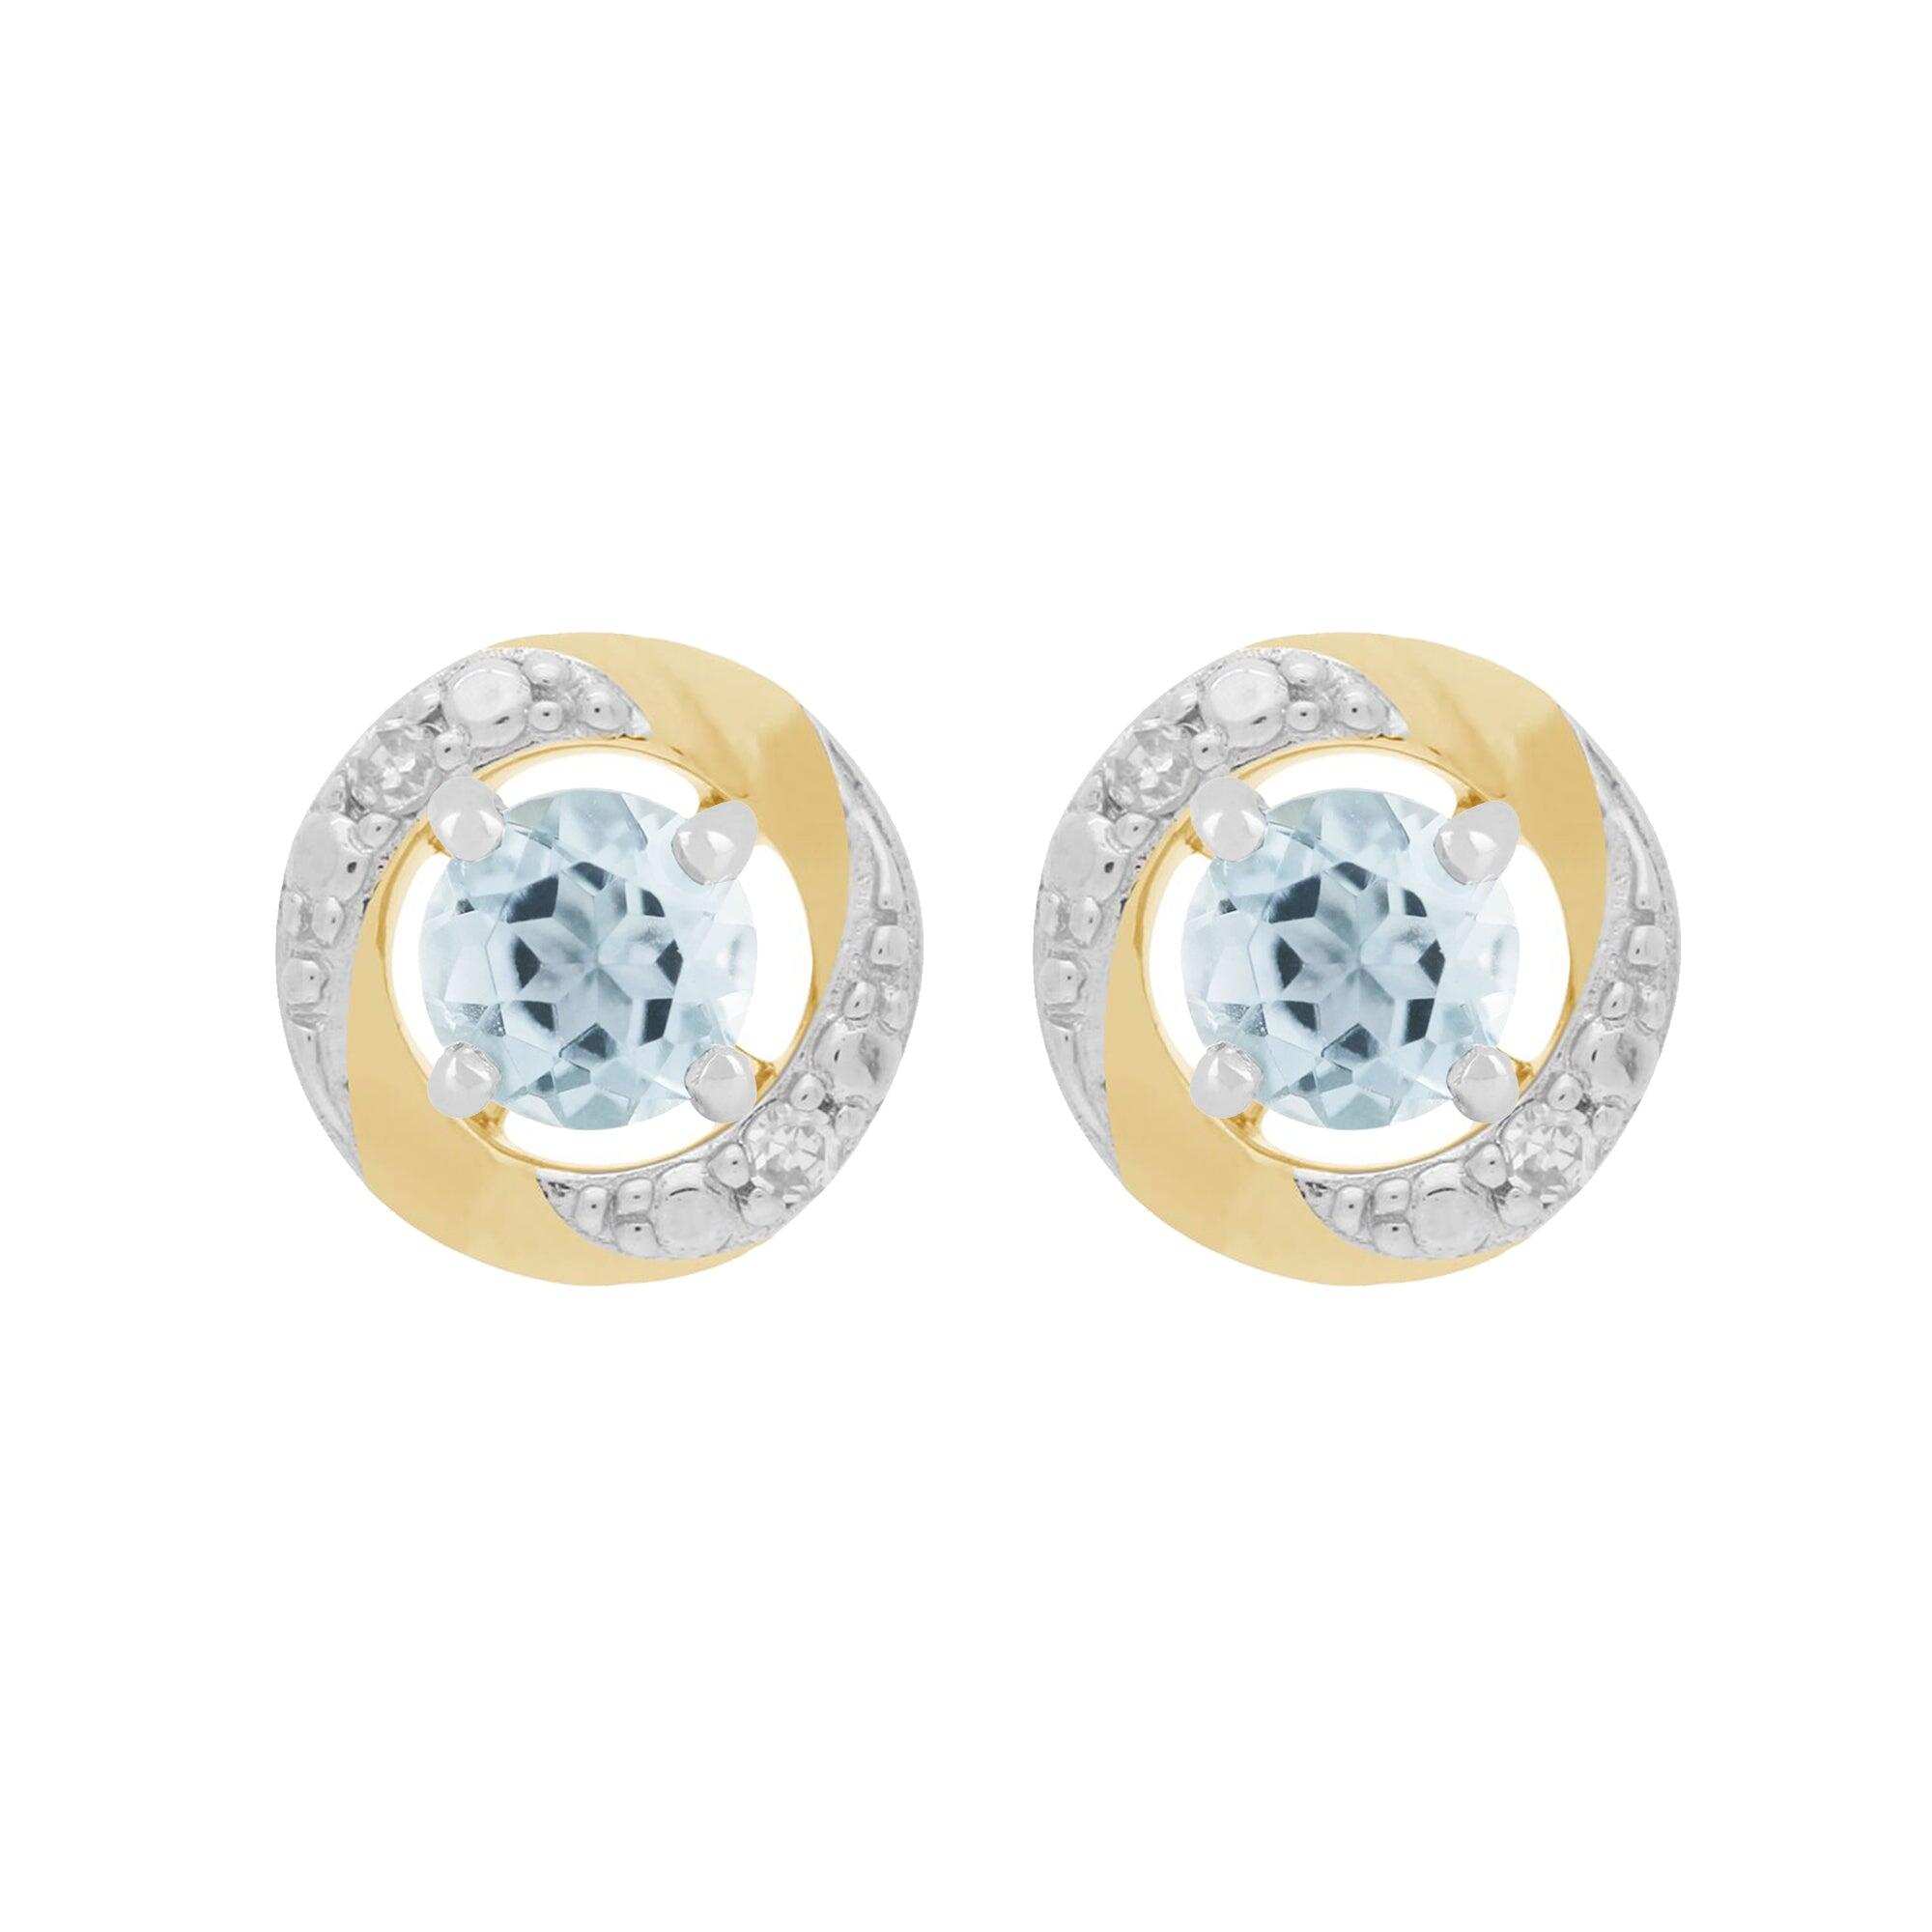 9ct White Gold Aquamarine Stud Earrings with Detachable Diamond Halo Ear Jacket in 9ct Yellow Gold